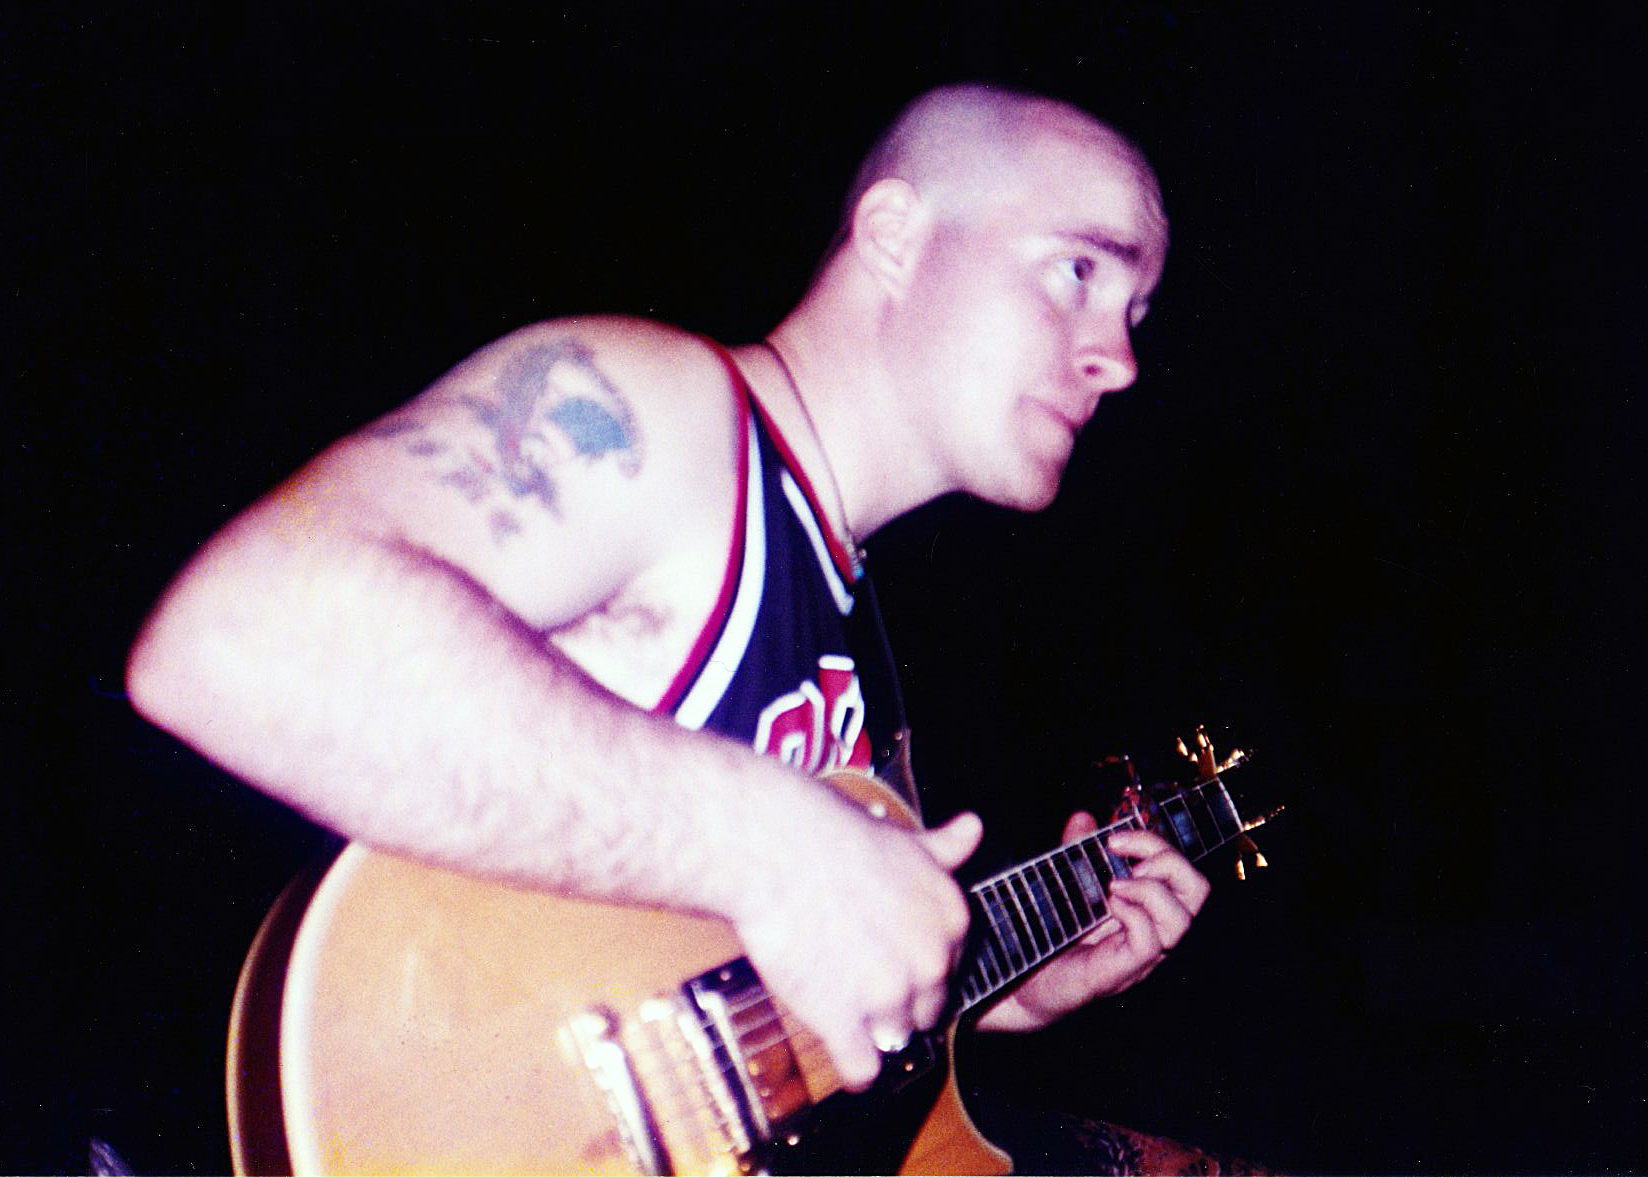 Jason Thalman and his Les Paul Custom guitar prior to its theft